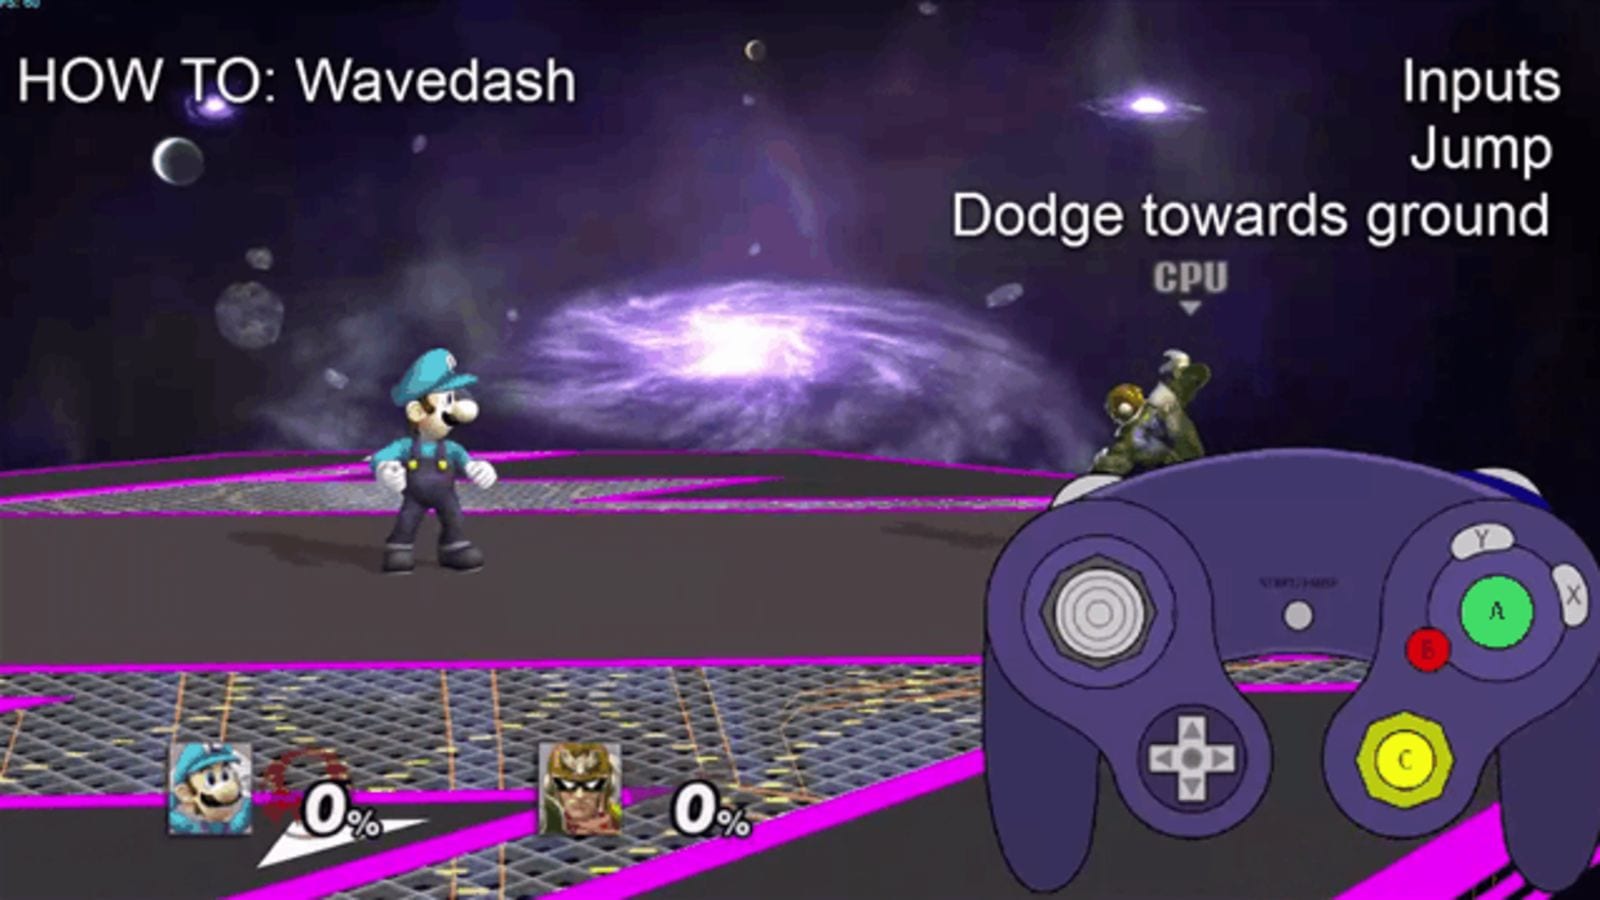 Super Smash Bros.: Will Melee Survive the Coming of Ultimate?